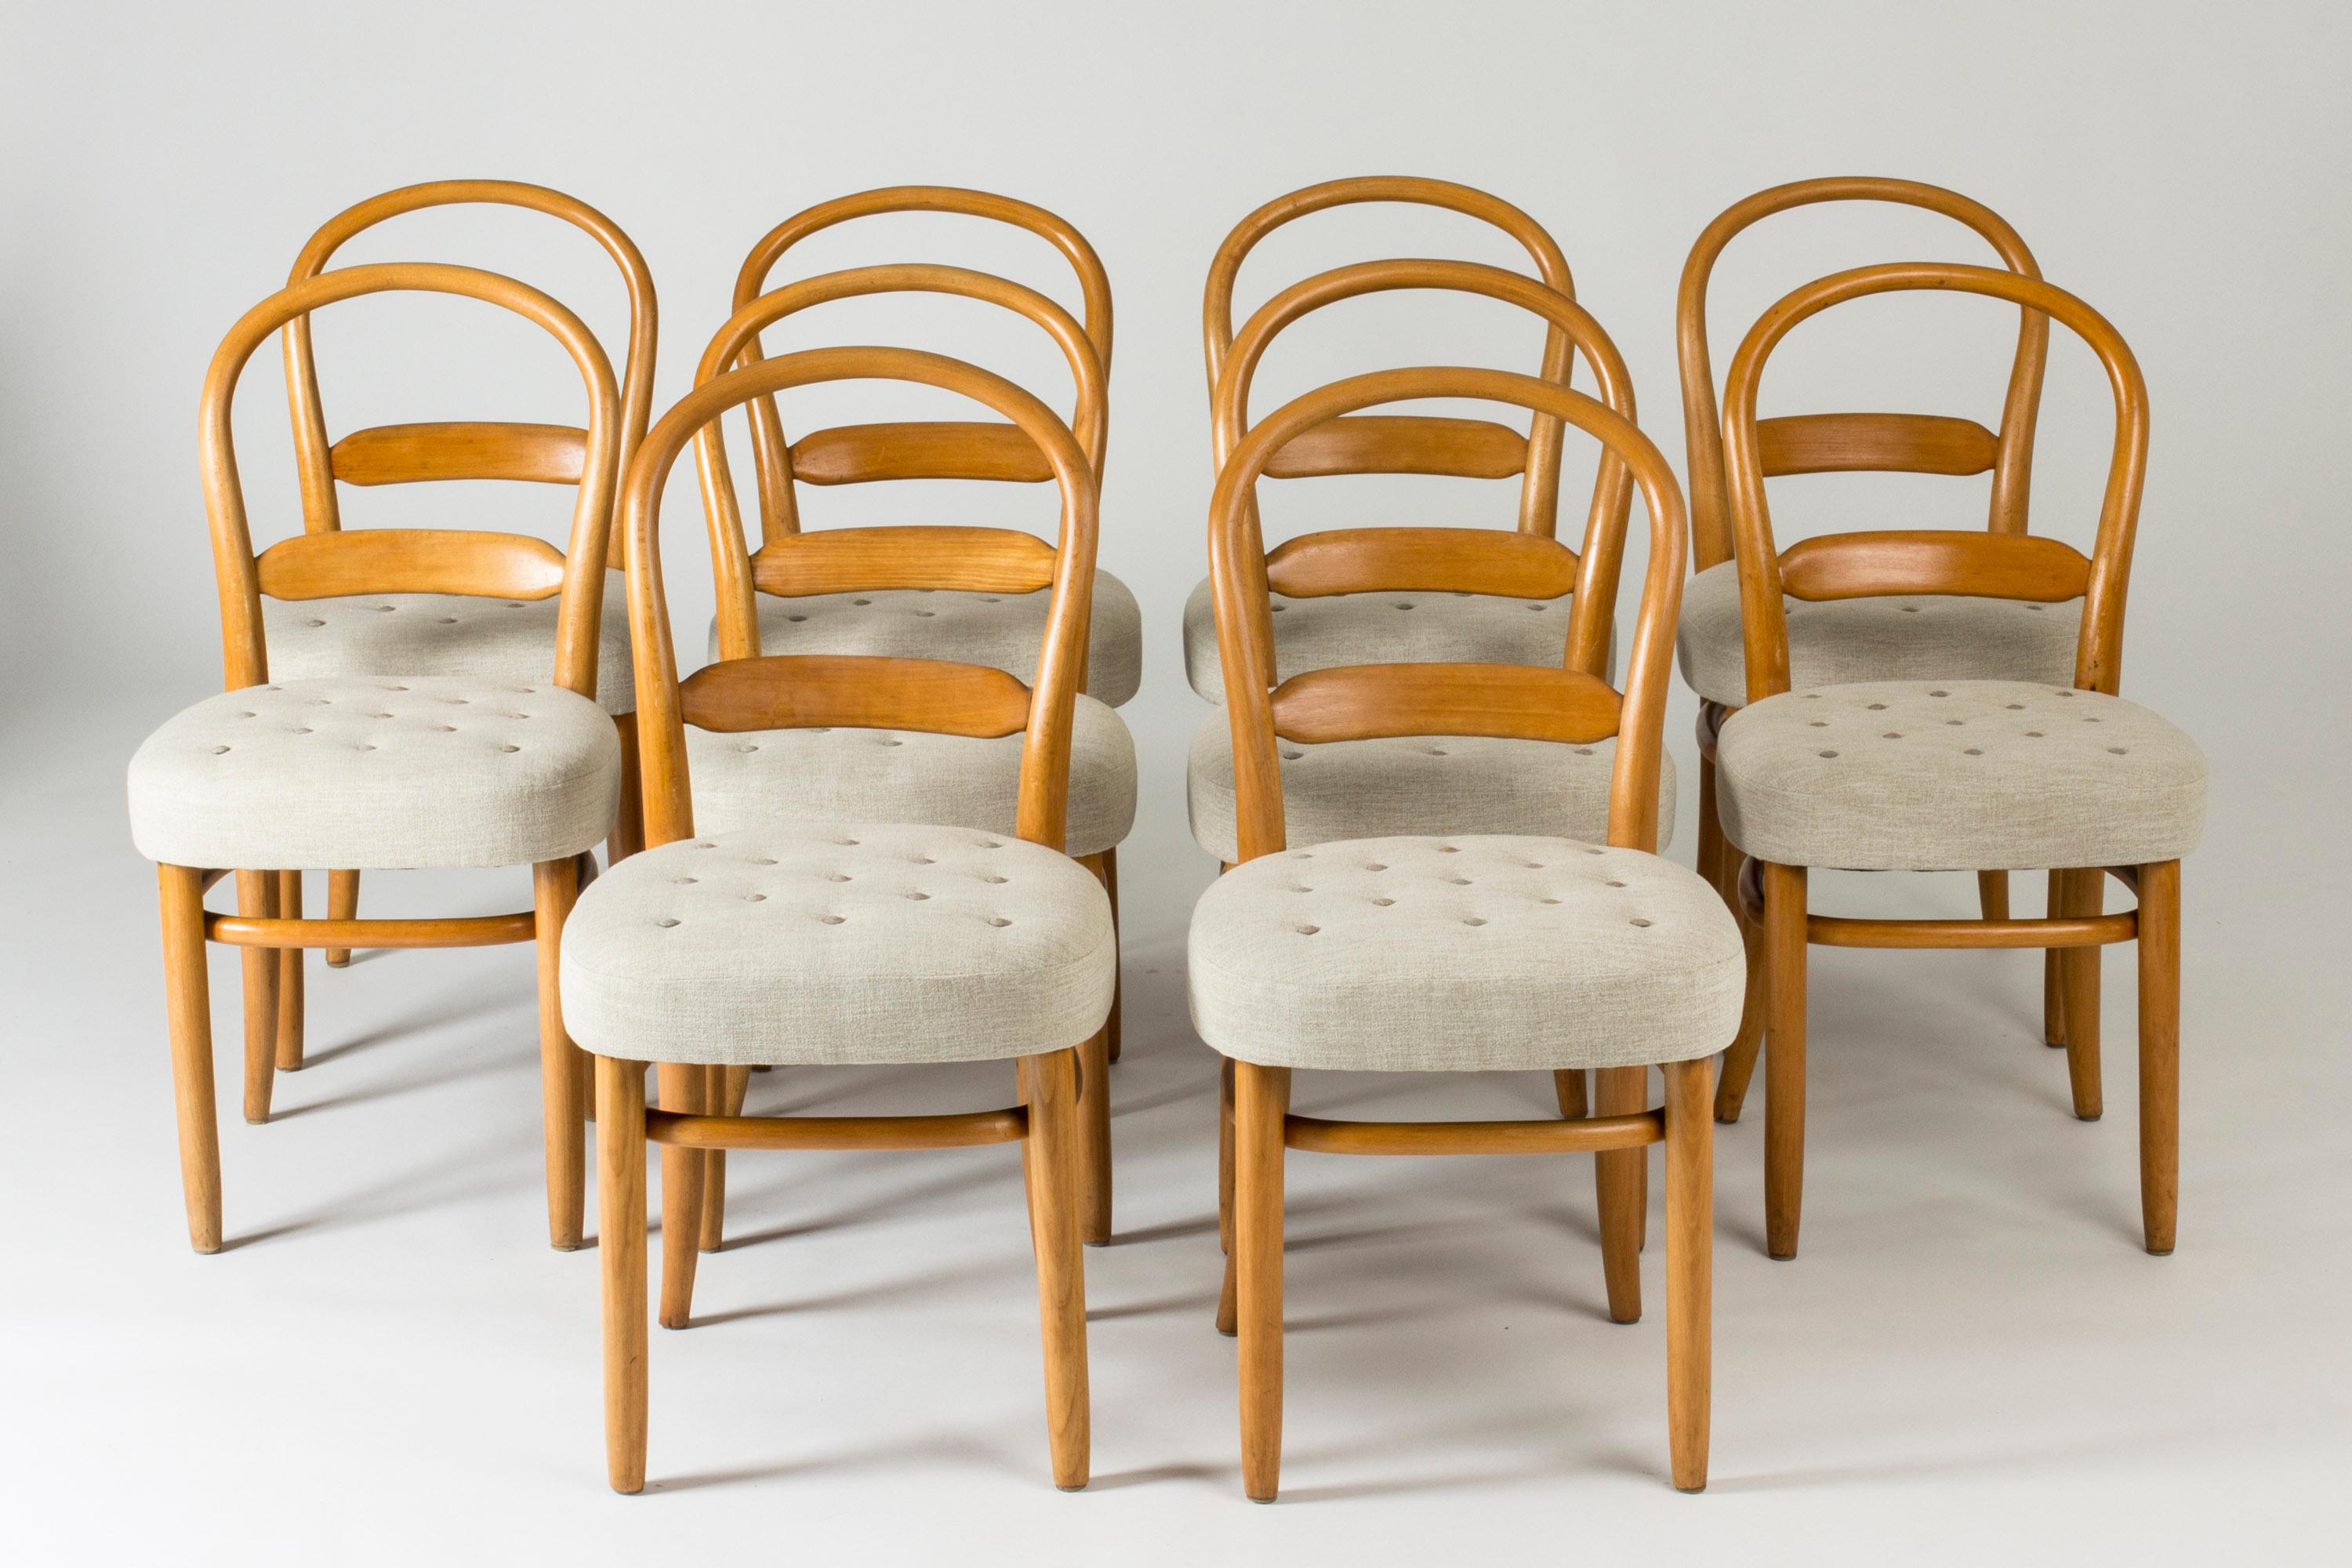 Set of ten dining chairs by Carl-Axel Acking, made from beech bentwood in a neat design with elegantly curved backs. These chairs were originally made in 1937 for Tösse Bakery in Stockholm.